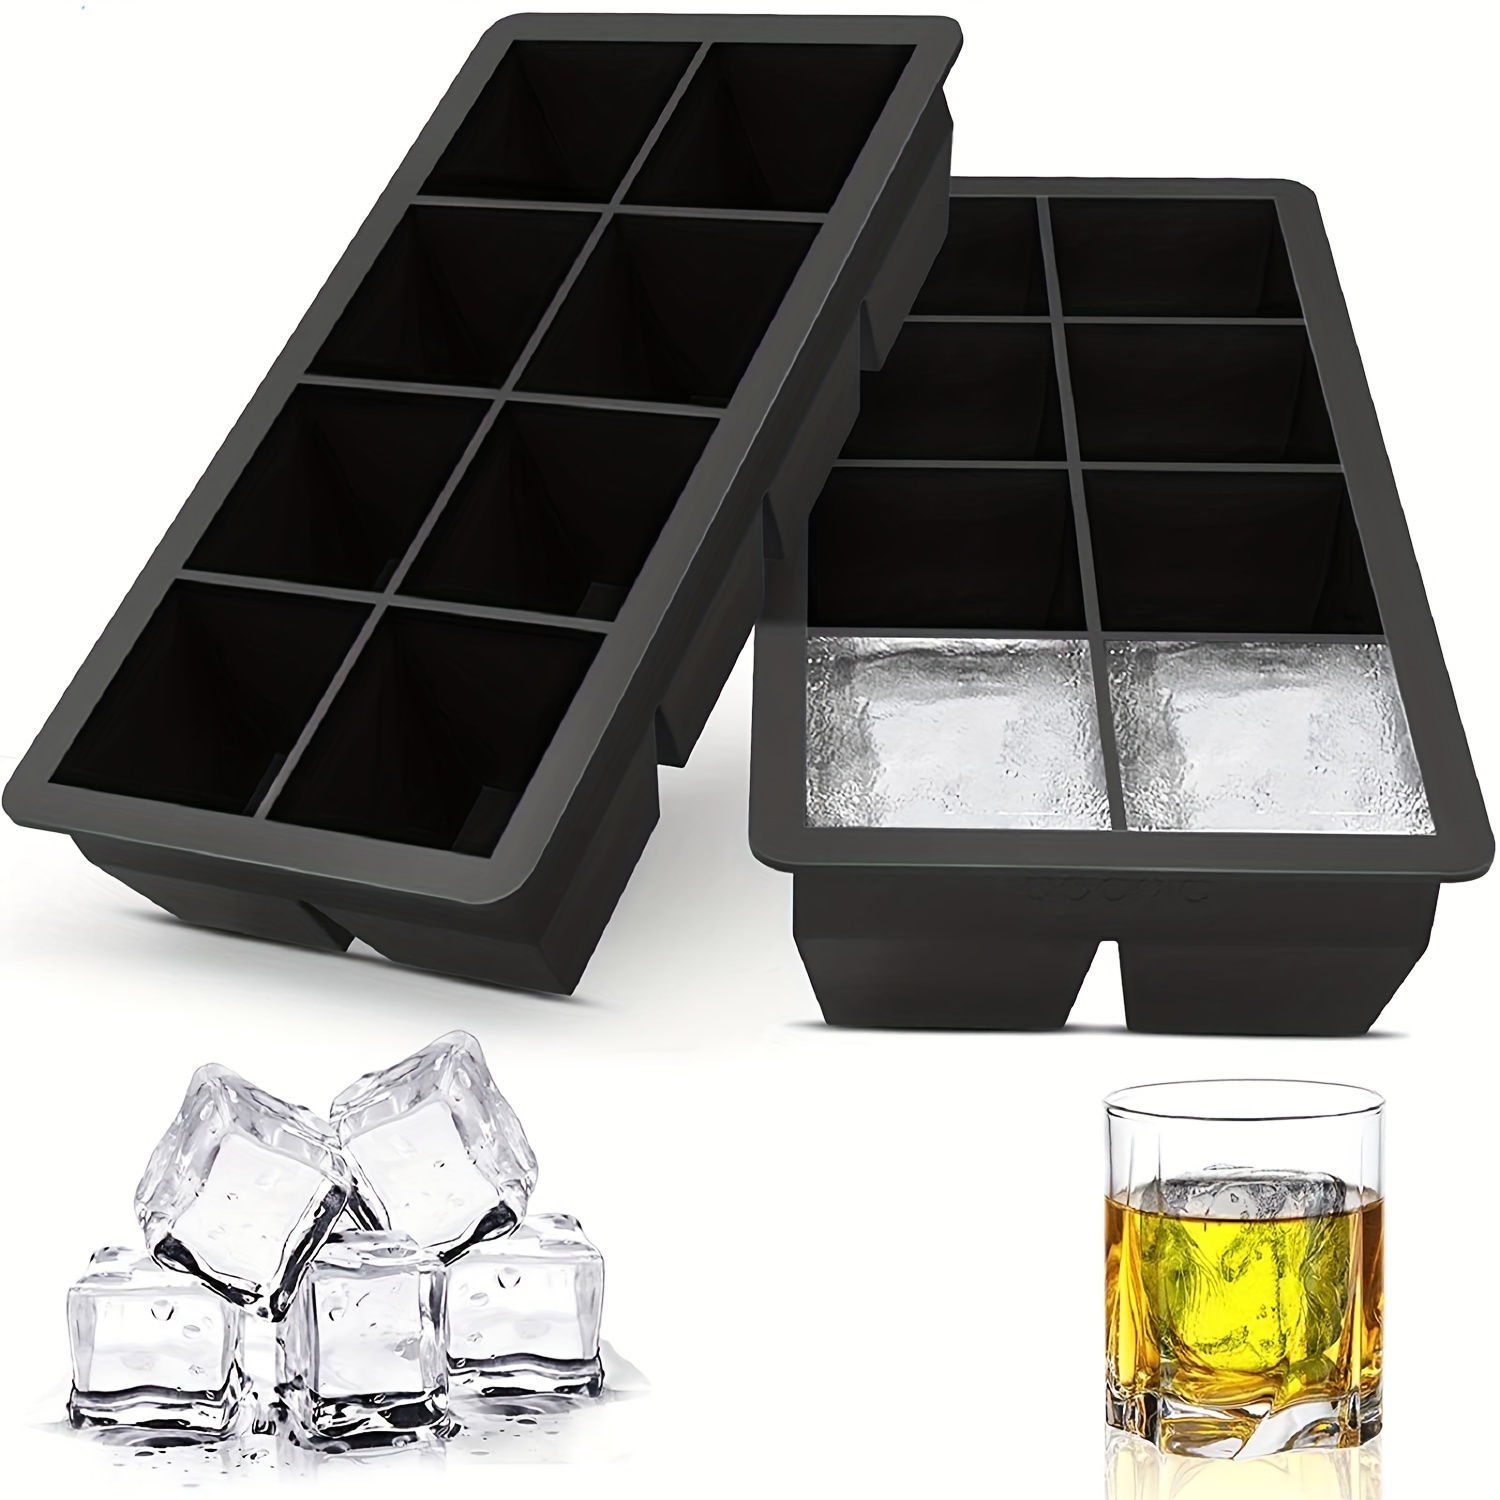 Large Silicone Ice Cube Tray Mold, Big Cubes - Bpa Free, Flexible